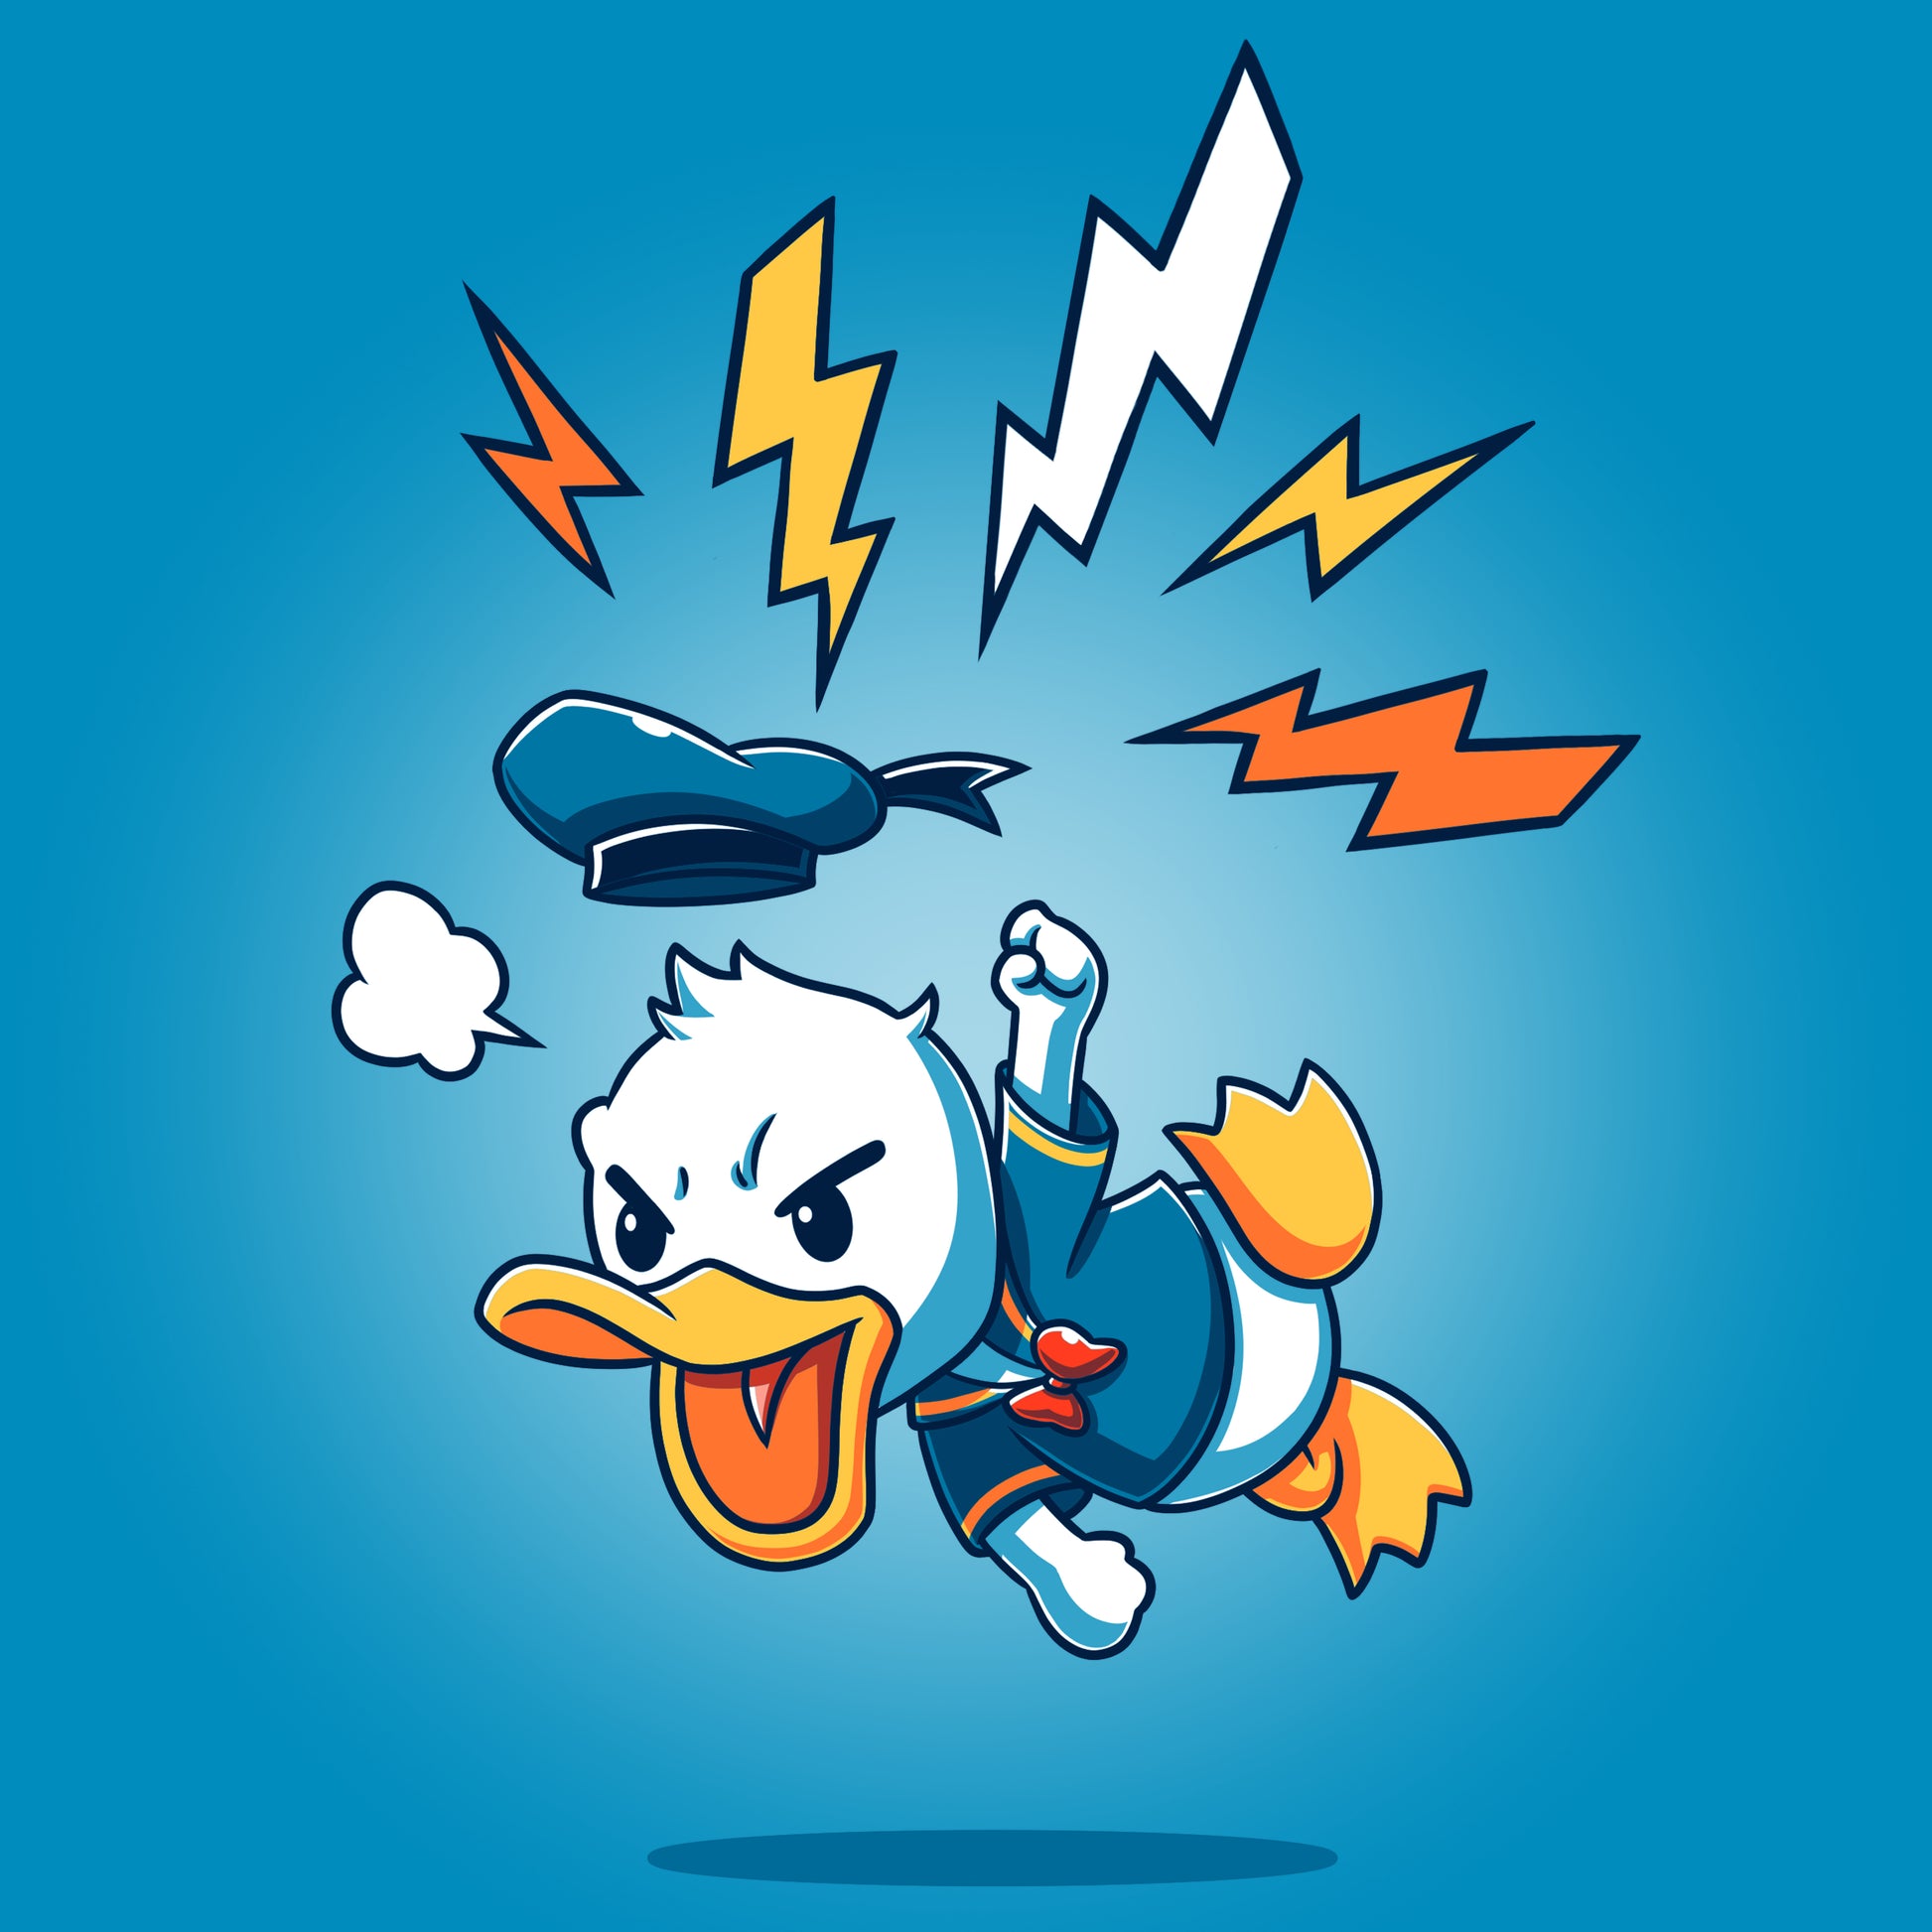 Rage Donald Duck T-shirt with a cartoon Donald Duck flying among lightning bolts by Disney.